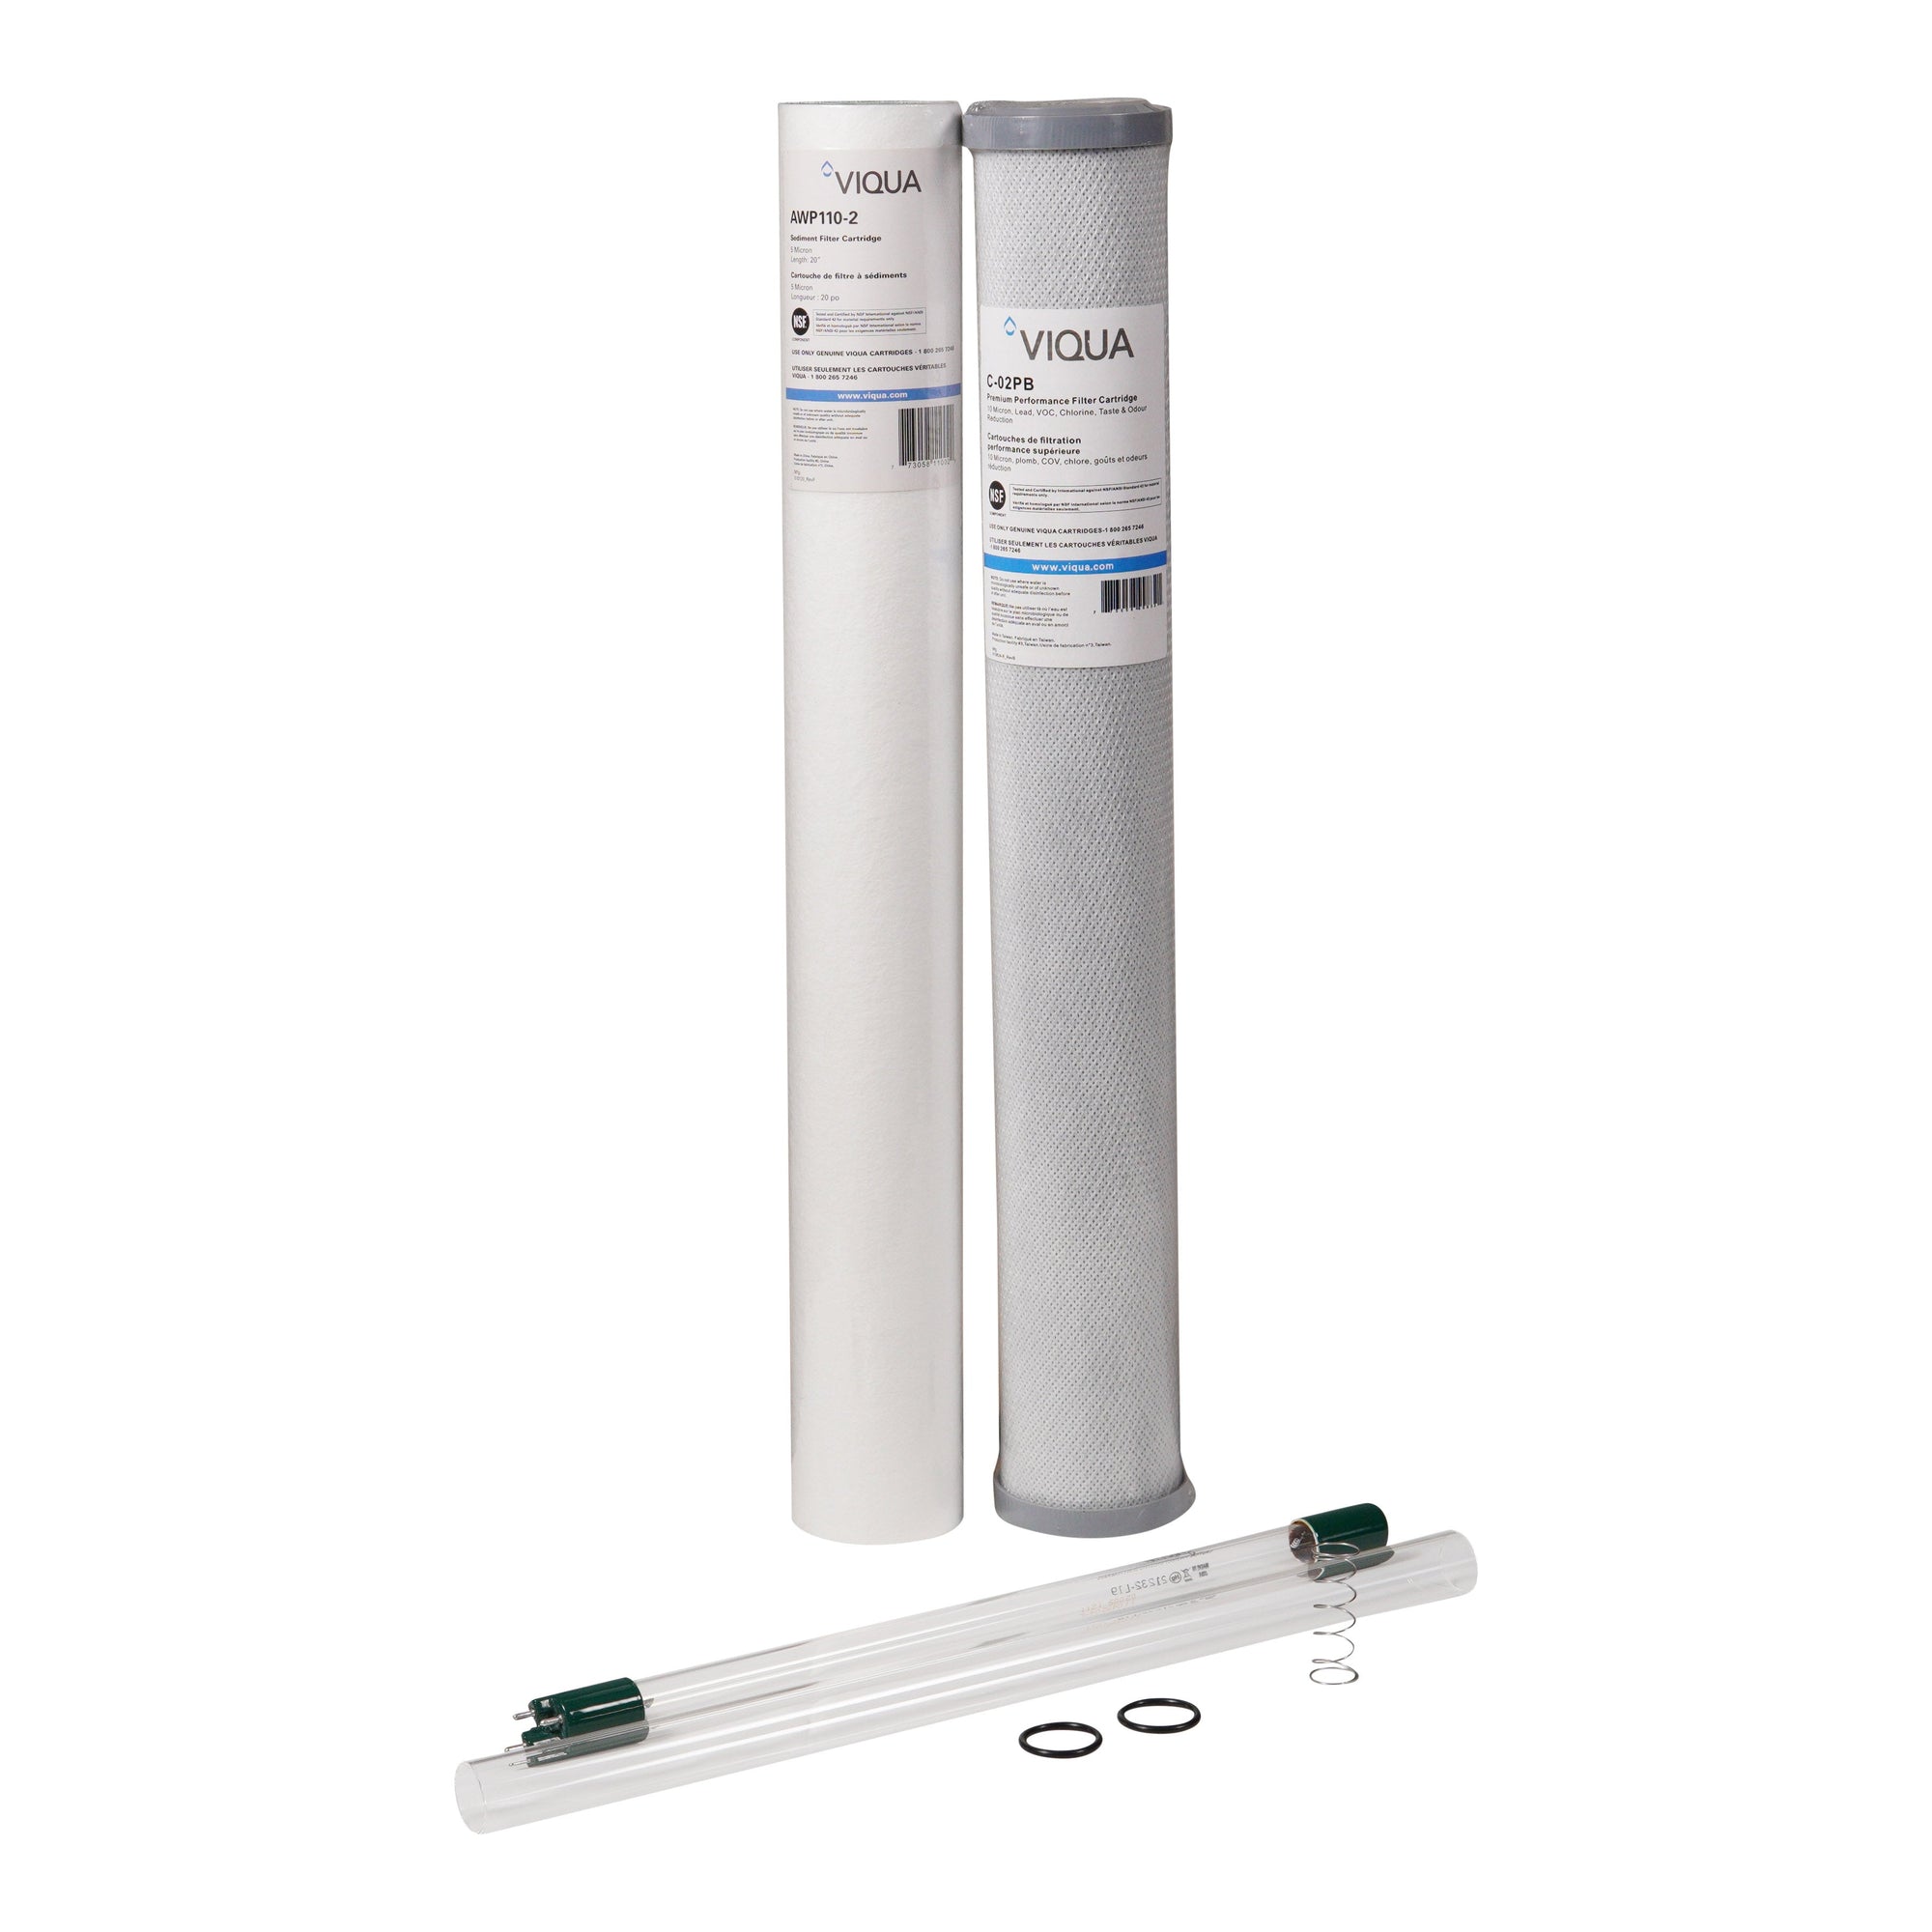 Viqua VT4-DWS Replacement UV Lamp, Sleeve and Filters 